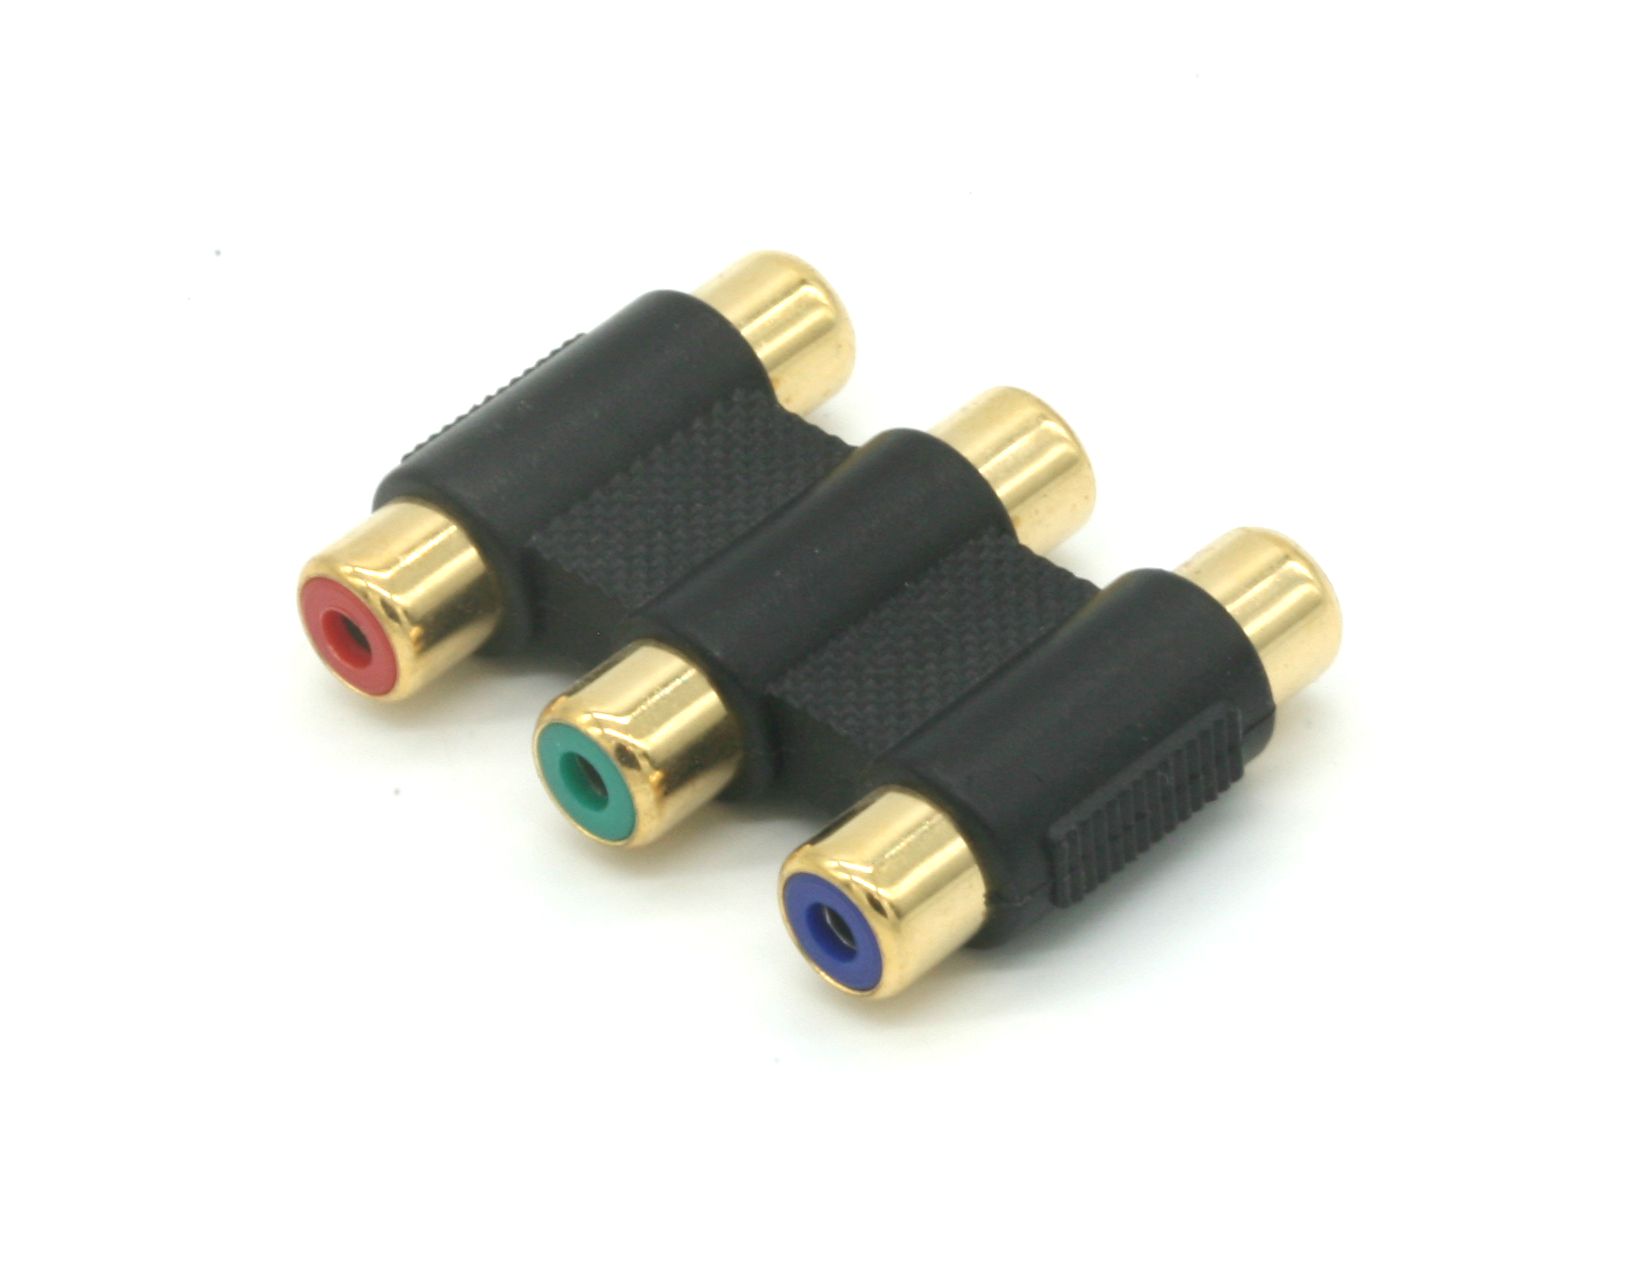 Ultra Gold COMPONENT Video Coupler Adapter Female x 2 RGB RCA connector analog